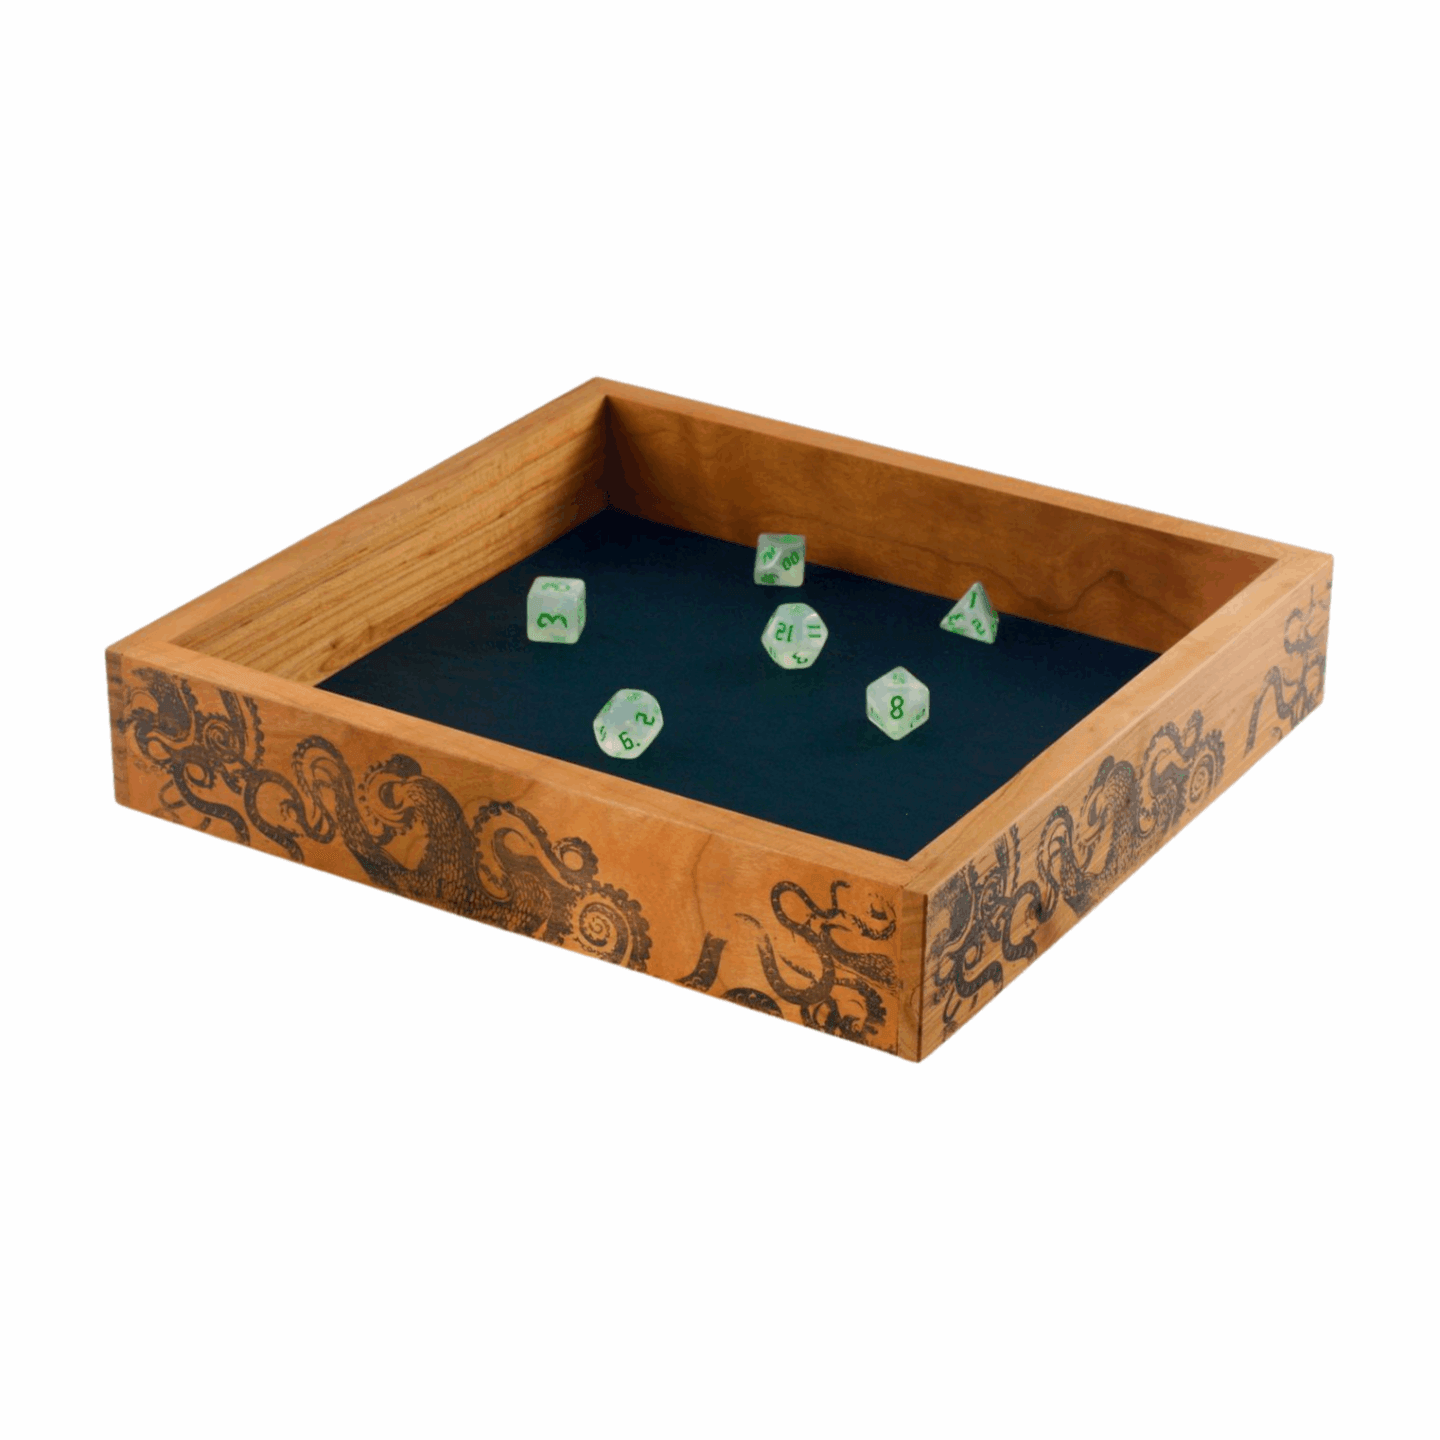 Large Cherry Wood Dice Tray with Tentacle Design for Tabletop Gaming - Dragon Armor Games